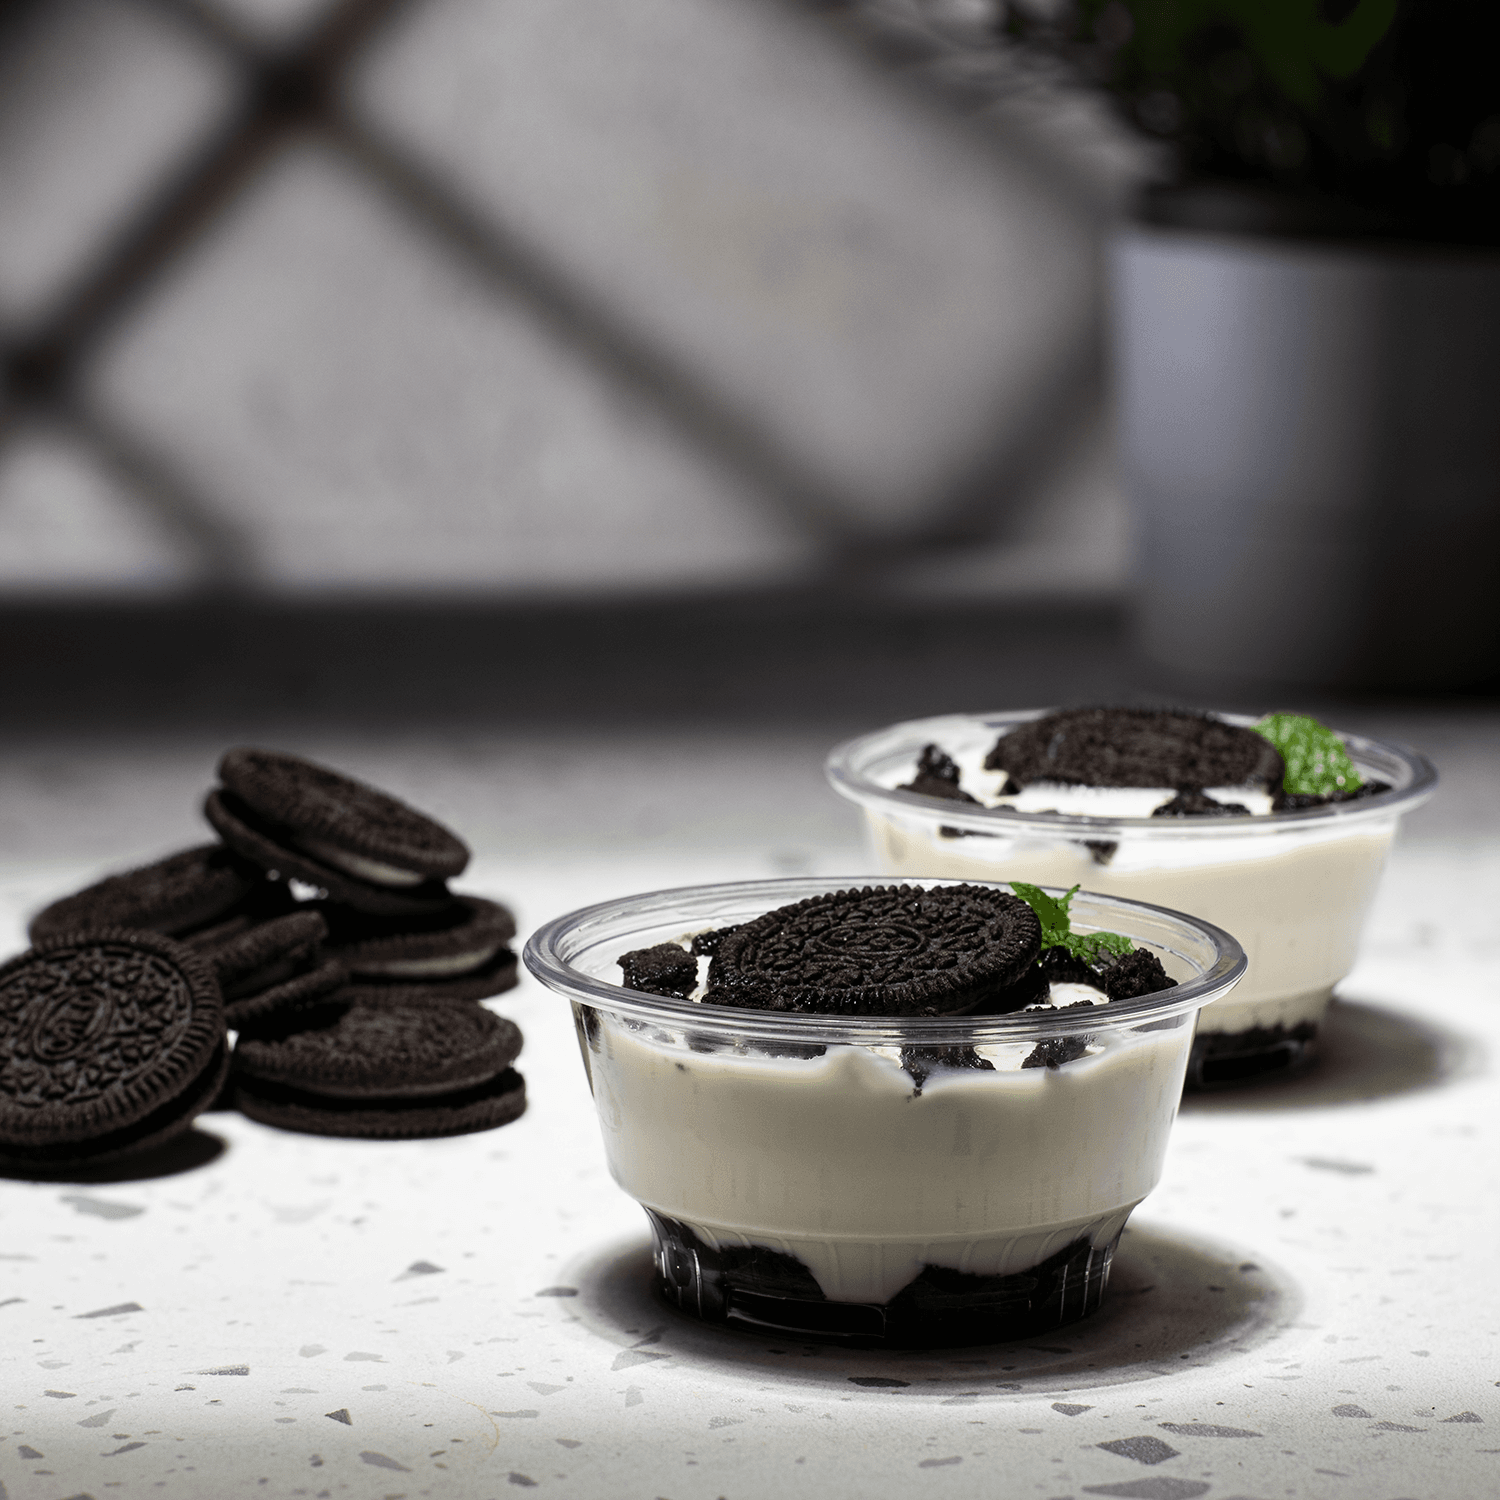 Clear Karat 5oz PET Plastic Dessert Cups with cookies and cream pudding